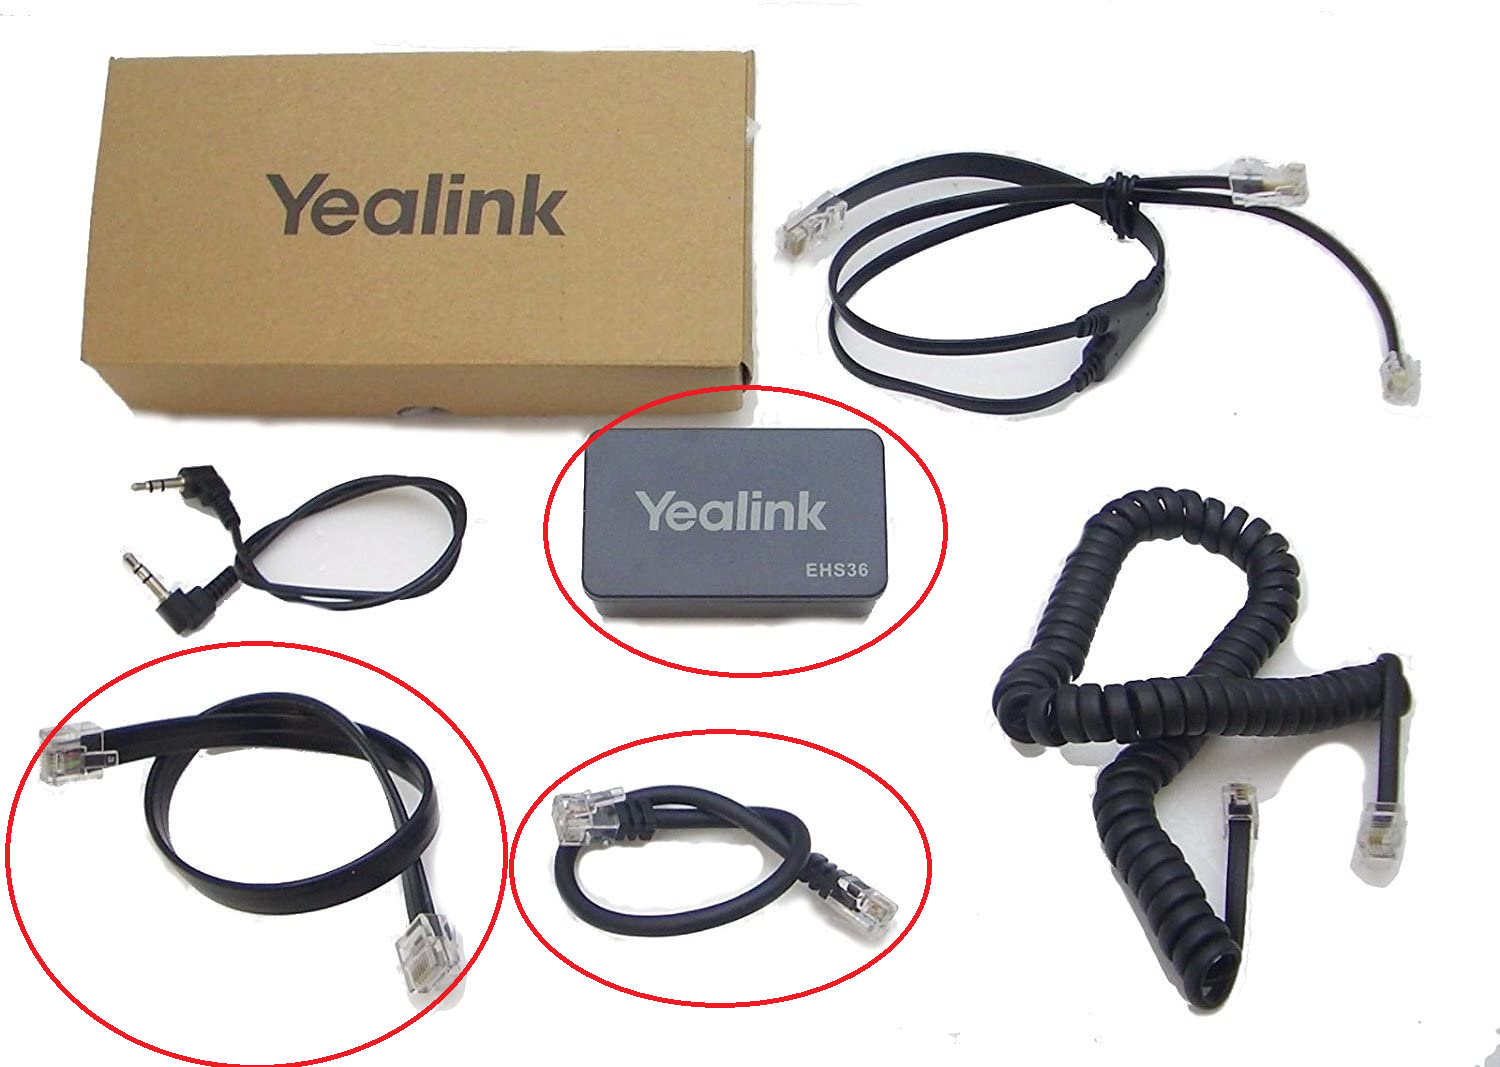 Yealink cables and Yealink EHS adapter box